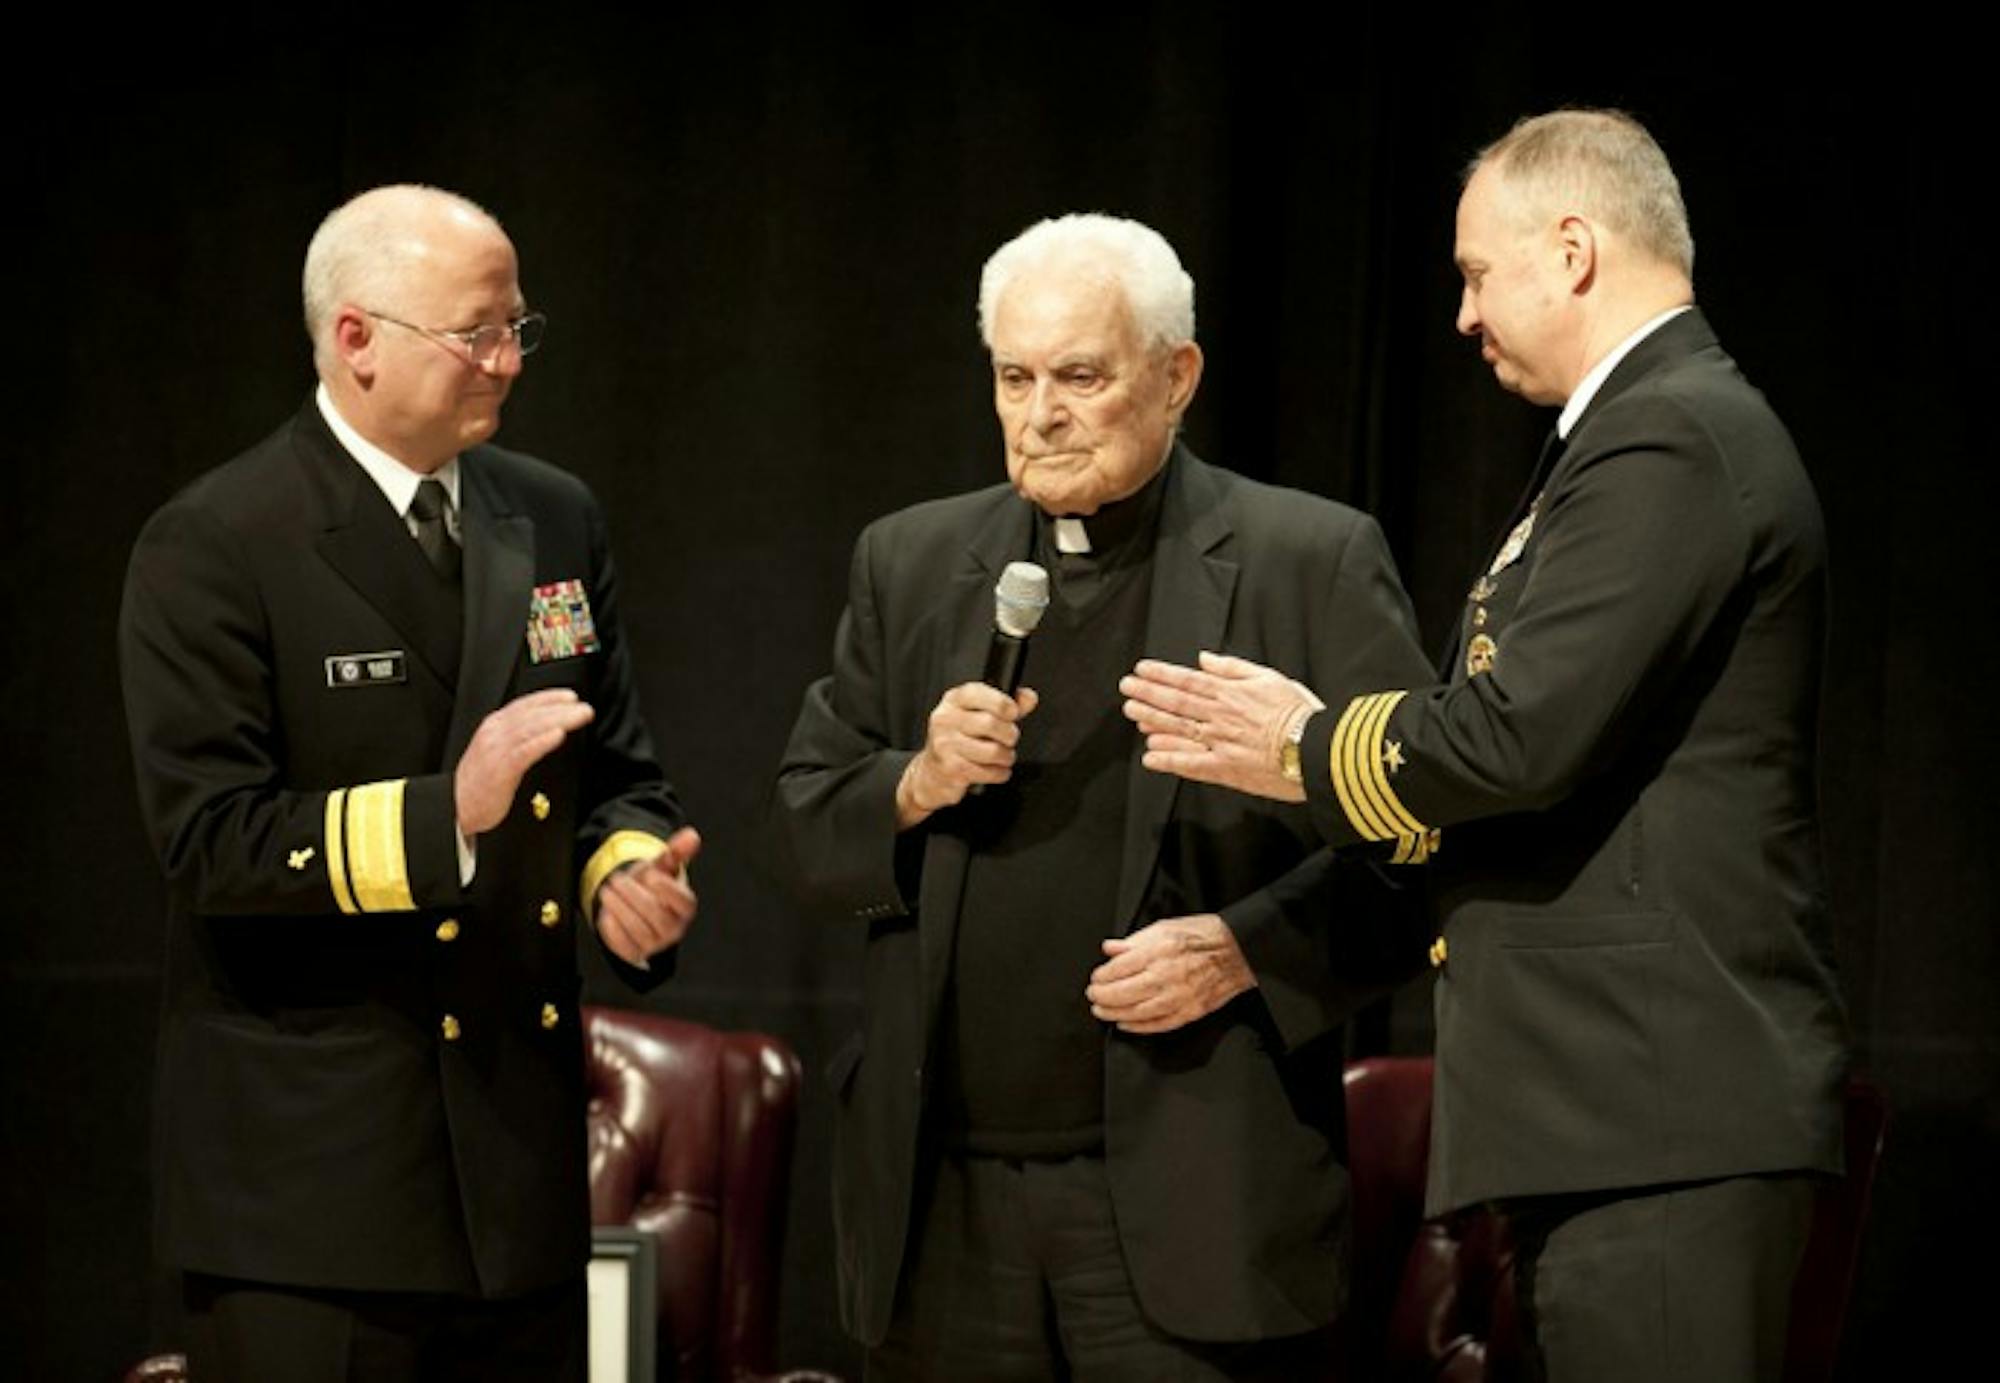 Fr. Theodore Hesburgh, center, speaks during his ceremony to become an honorary naval chaplain on April 17, 2013. Rear Admiral Mark Tidd, chief of U.S. Navy chaplains, stands to Hesburgh's left, and Captain Earl Carter, then-commanding officer of Notre Dame's Navy Reserve Officer Training Corps, stands to his right.